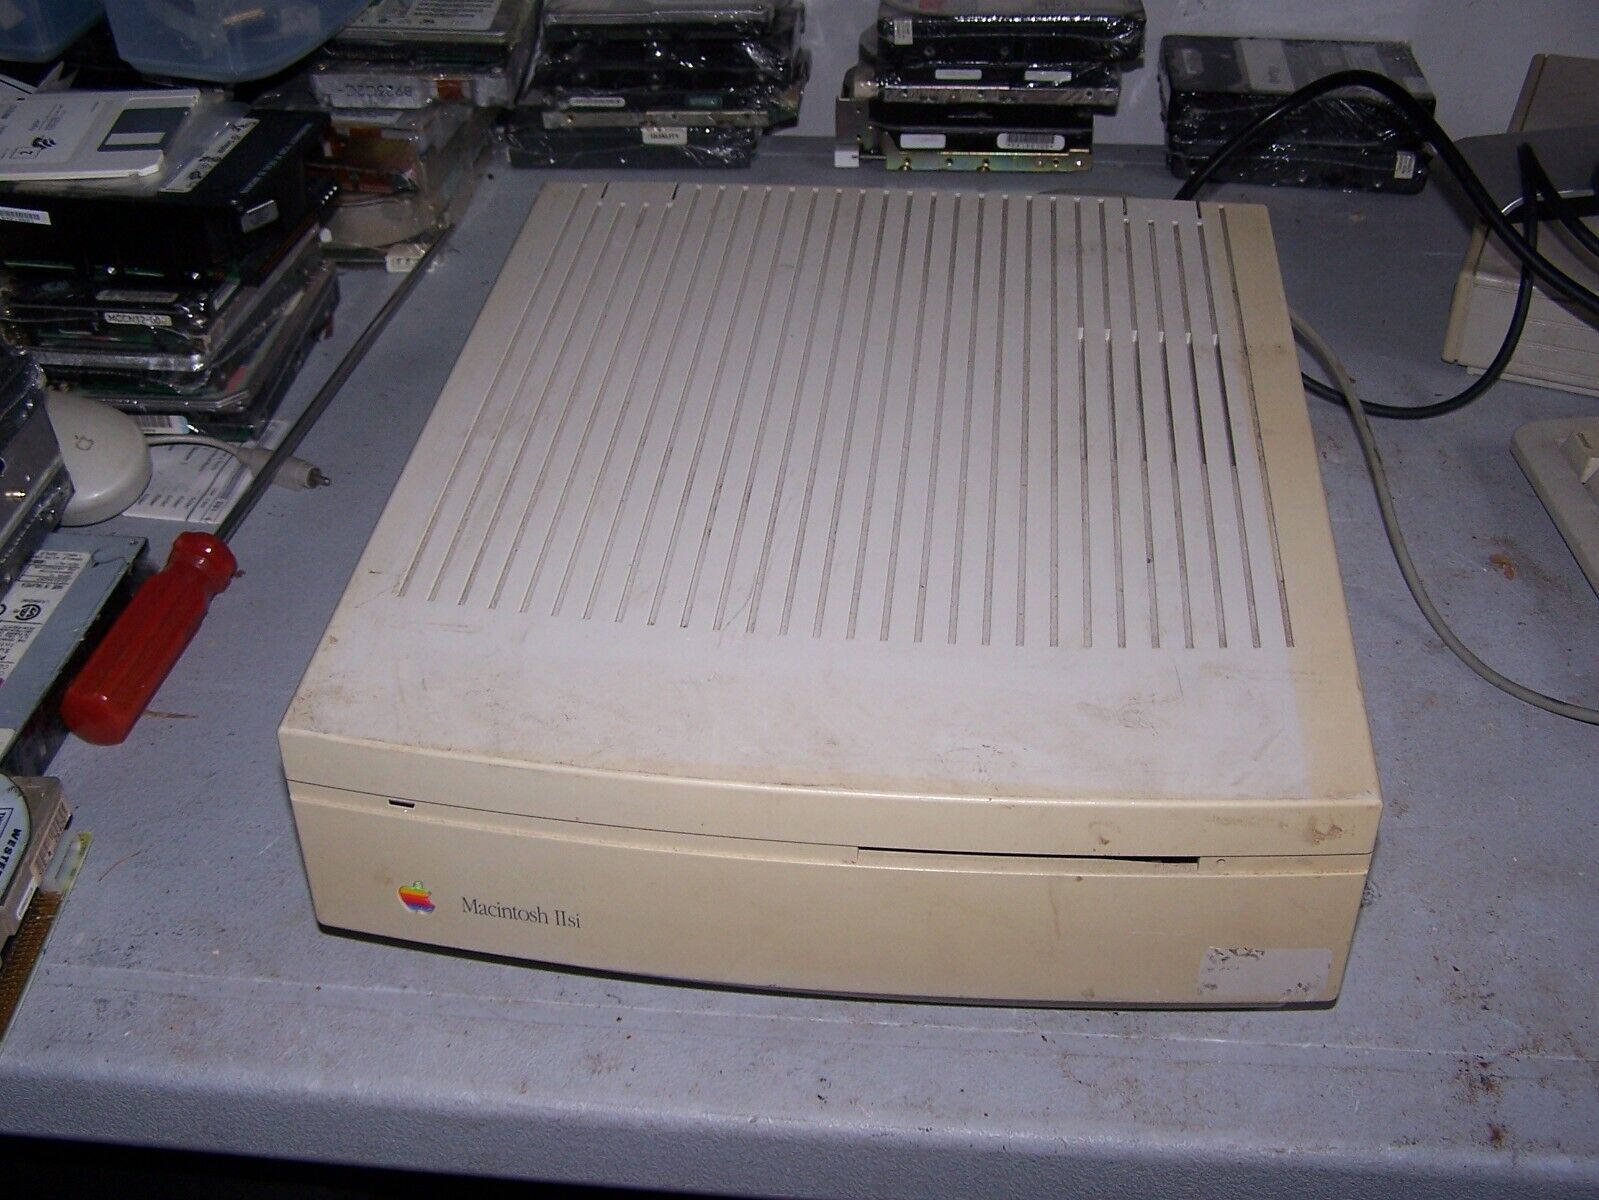 Apple Macintosh IIsi with Power Supply, Floppy Drive and Logic Board - AS IS